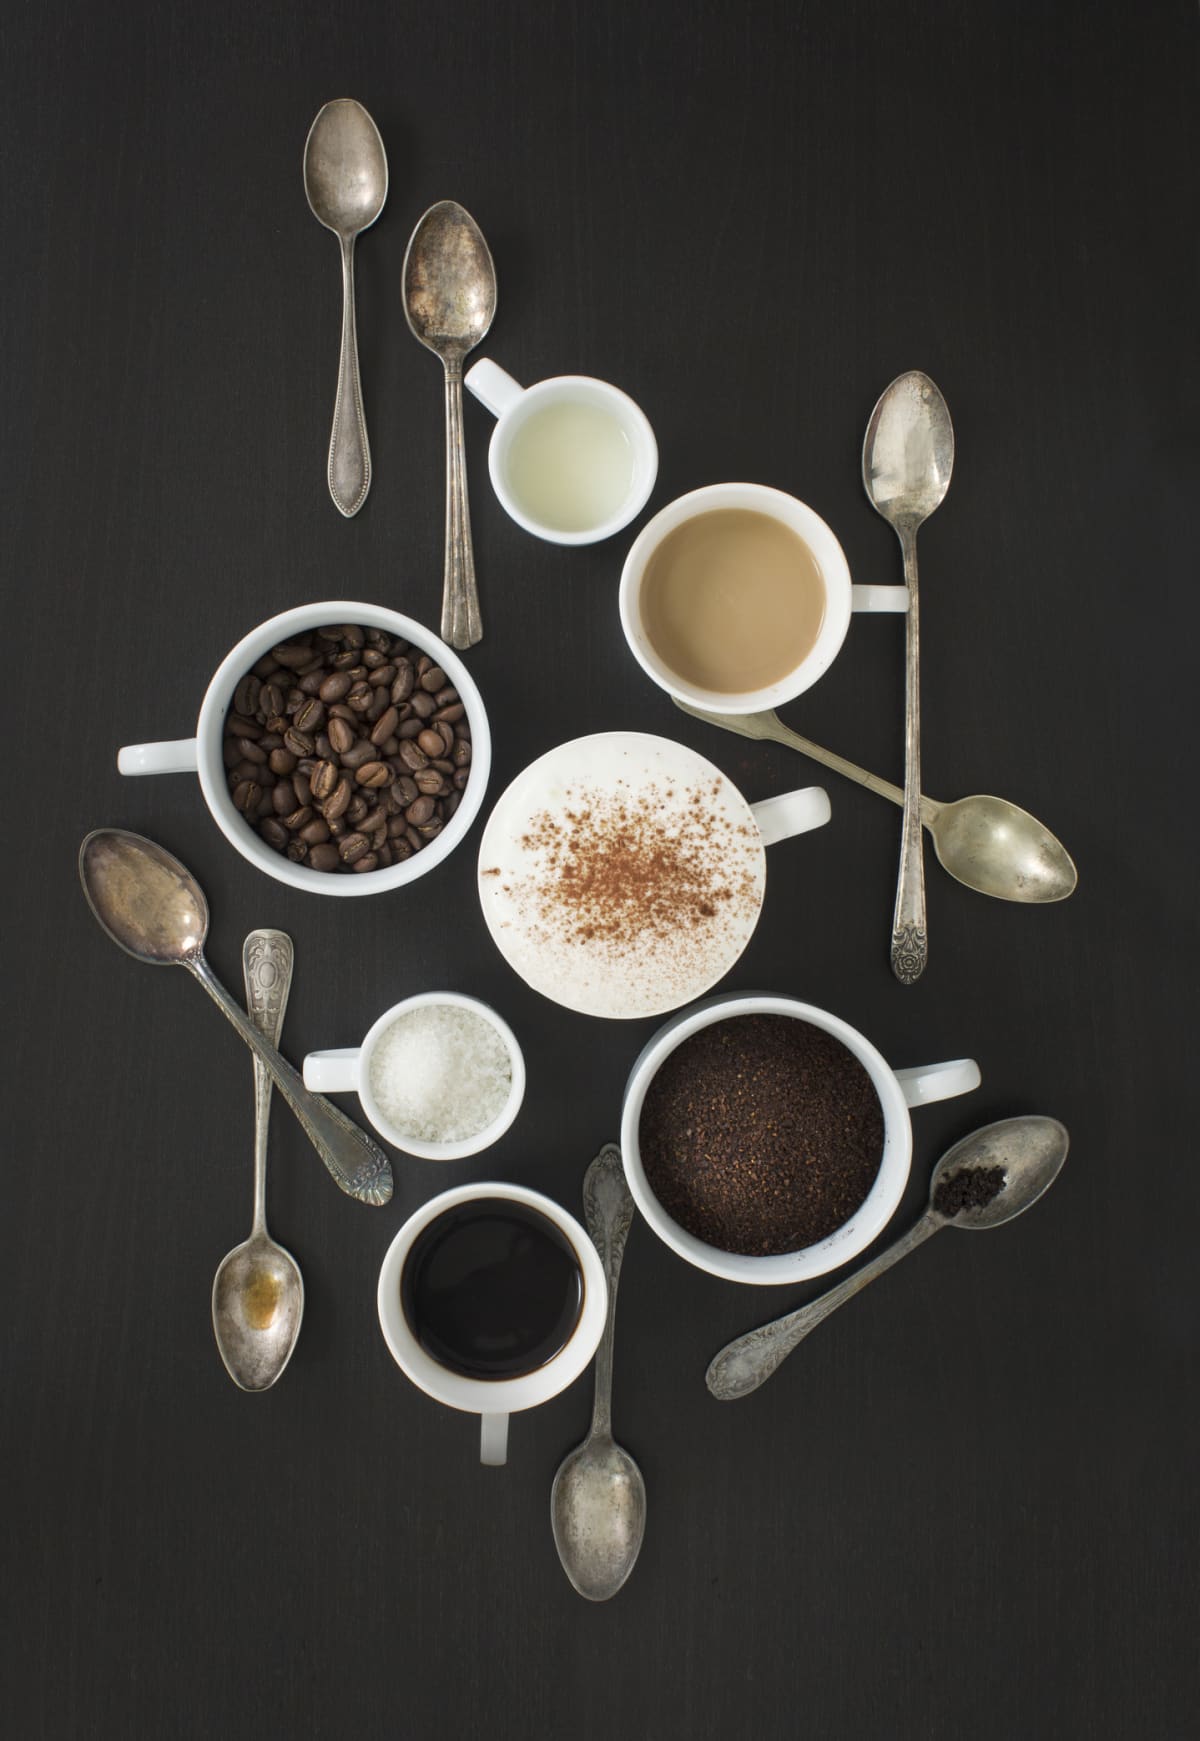 Overhead view of coffee drinks with ingredients on black wooden background